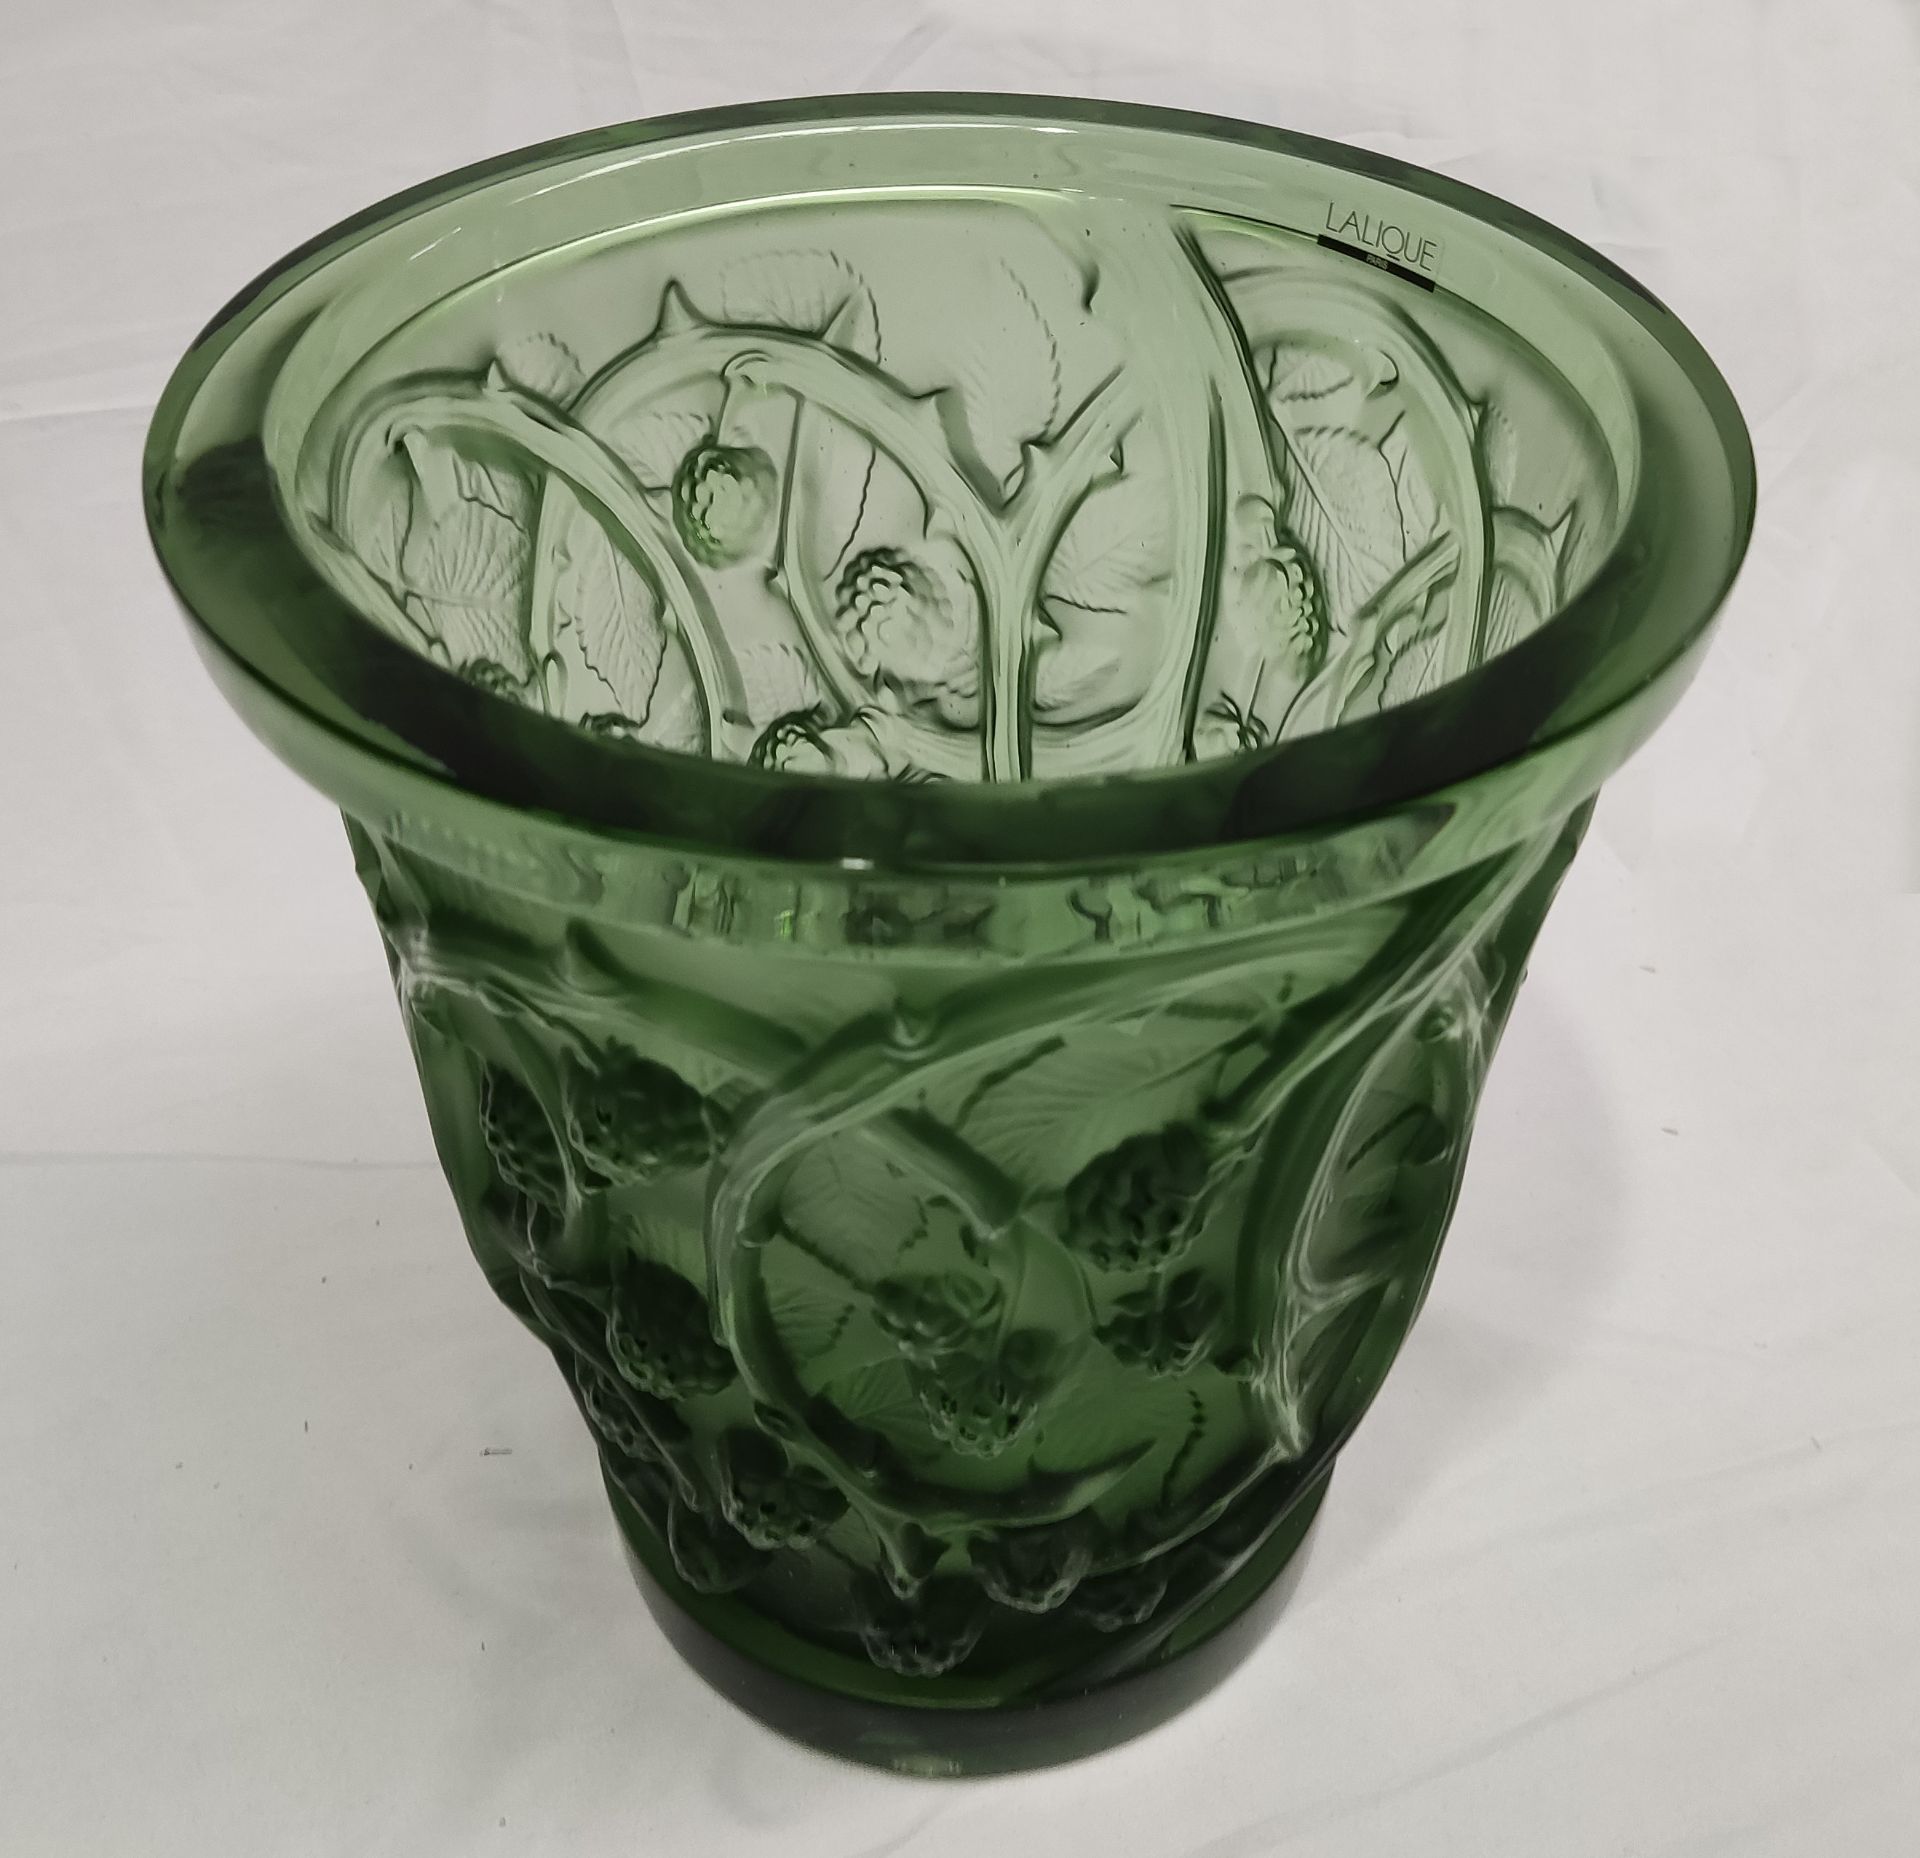 1 x LALIQUE 'Mures' Exquisite Handcrafted French Green Crystal Medium Vase - Original RRP £2,690 - Image 10 of 23